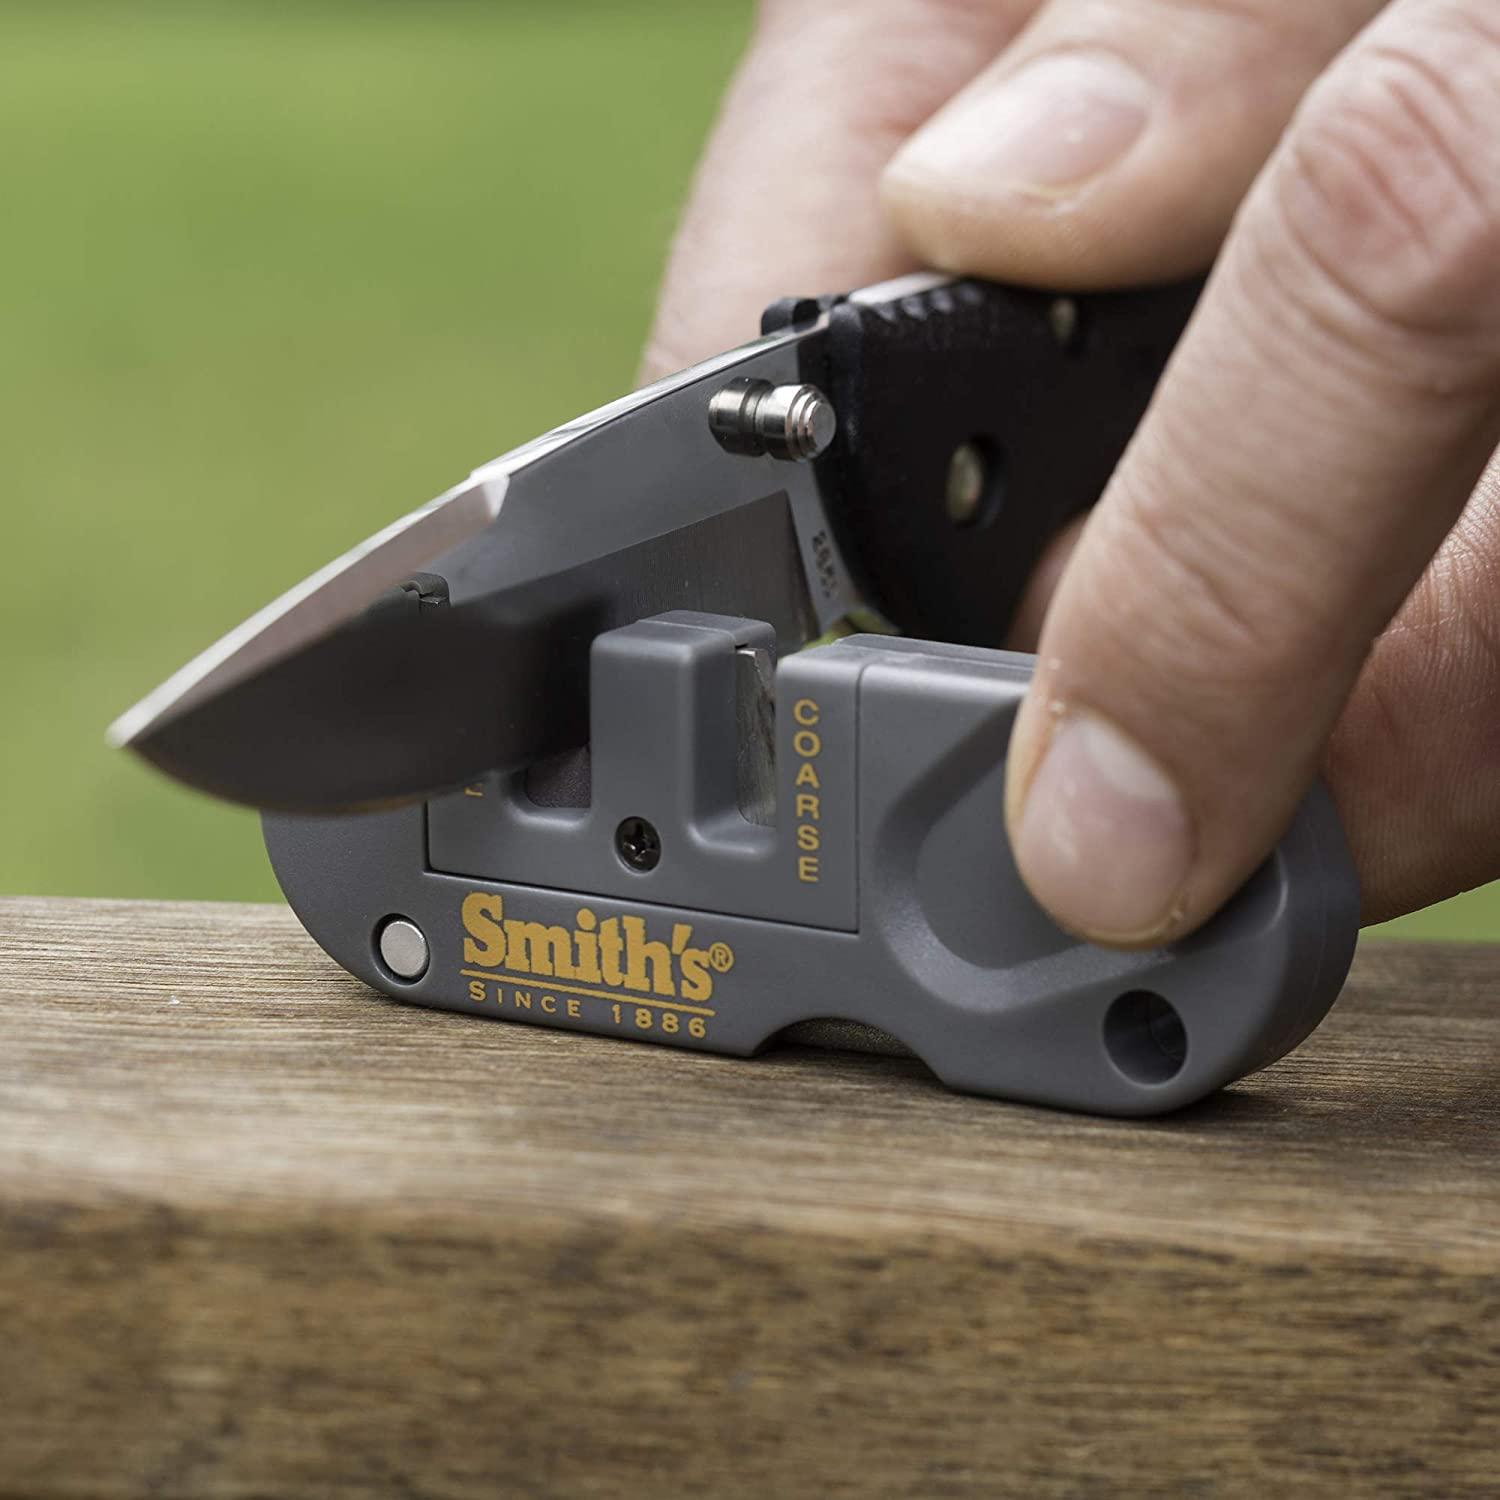 Smith's Consumer Products Store. POCKET PAL KNIFE SHARPENER